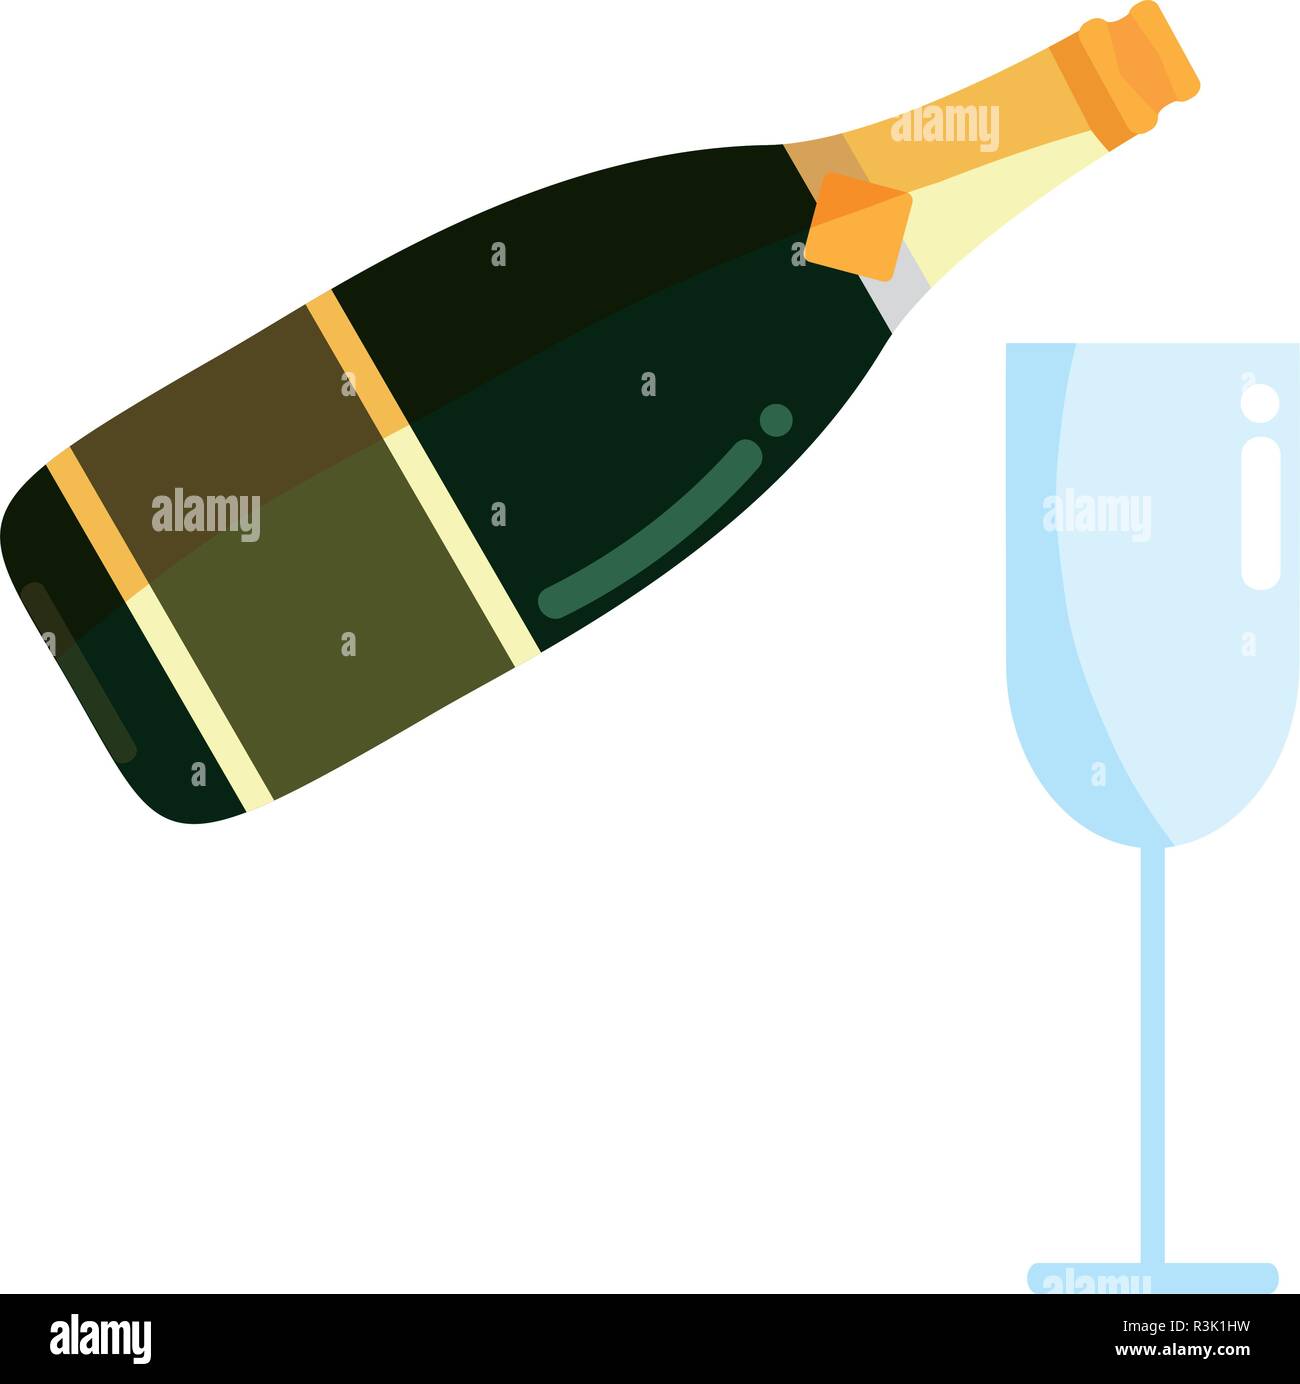 Champagne bottle and glass icon over white background, colorful design, vector illustration Stock Vector